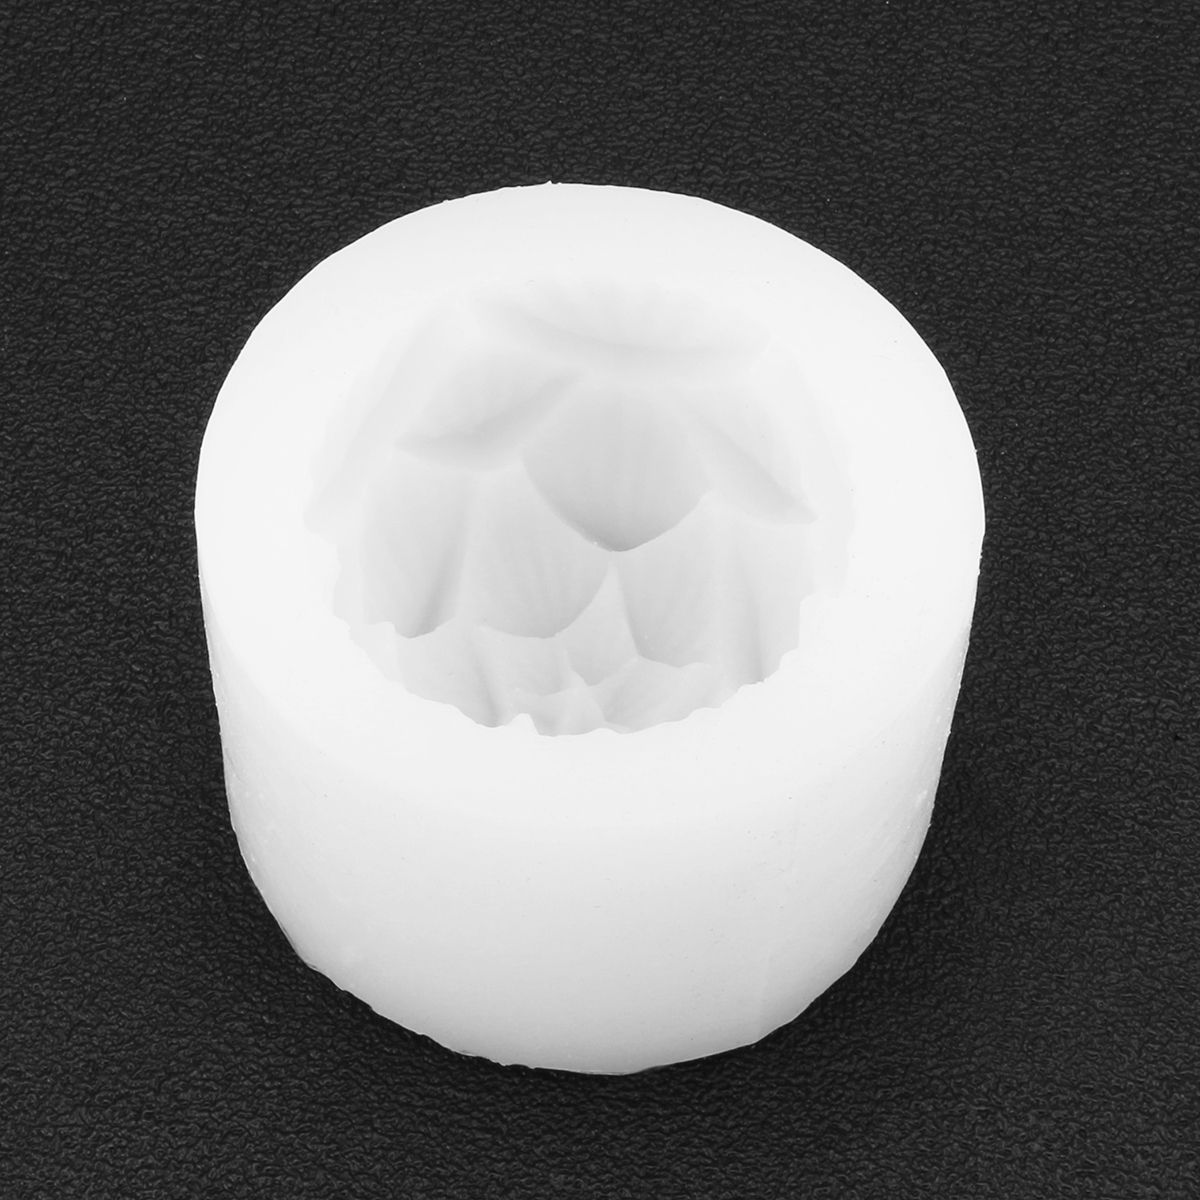 3D-Handmade-Silicone-Lotus-Flower-Soap-Mold-Candle-Making-Mold-Resin-1453433